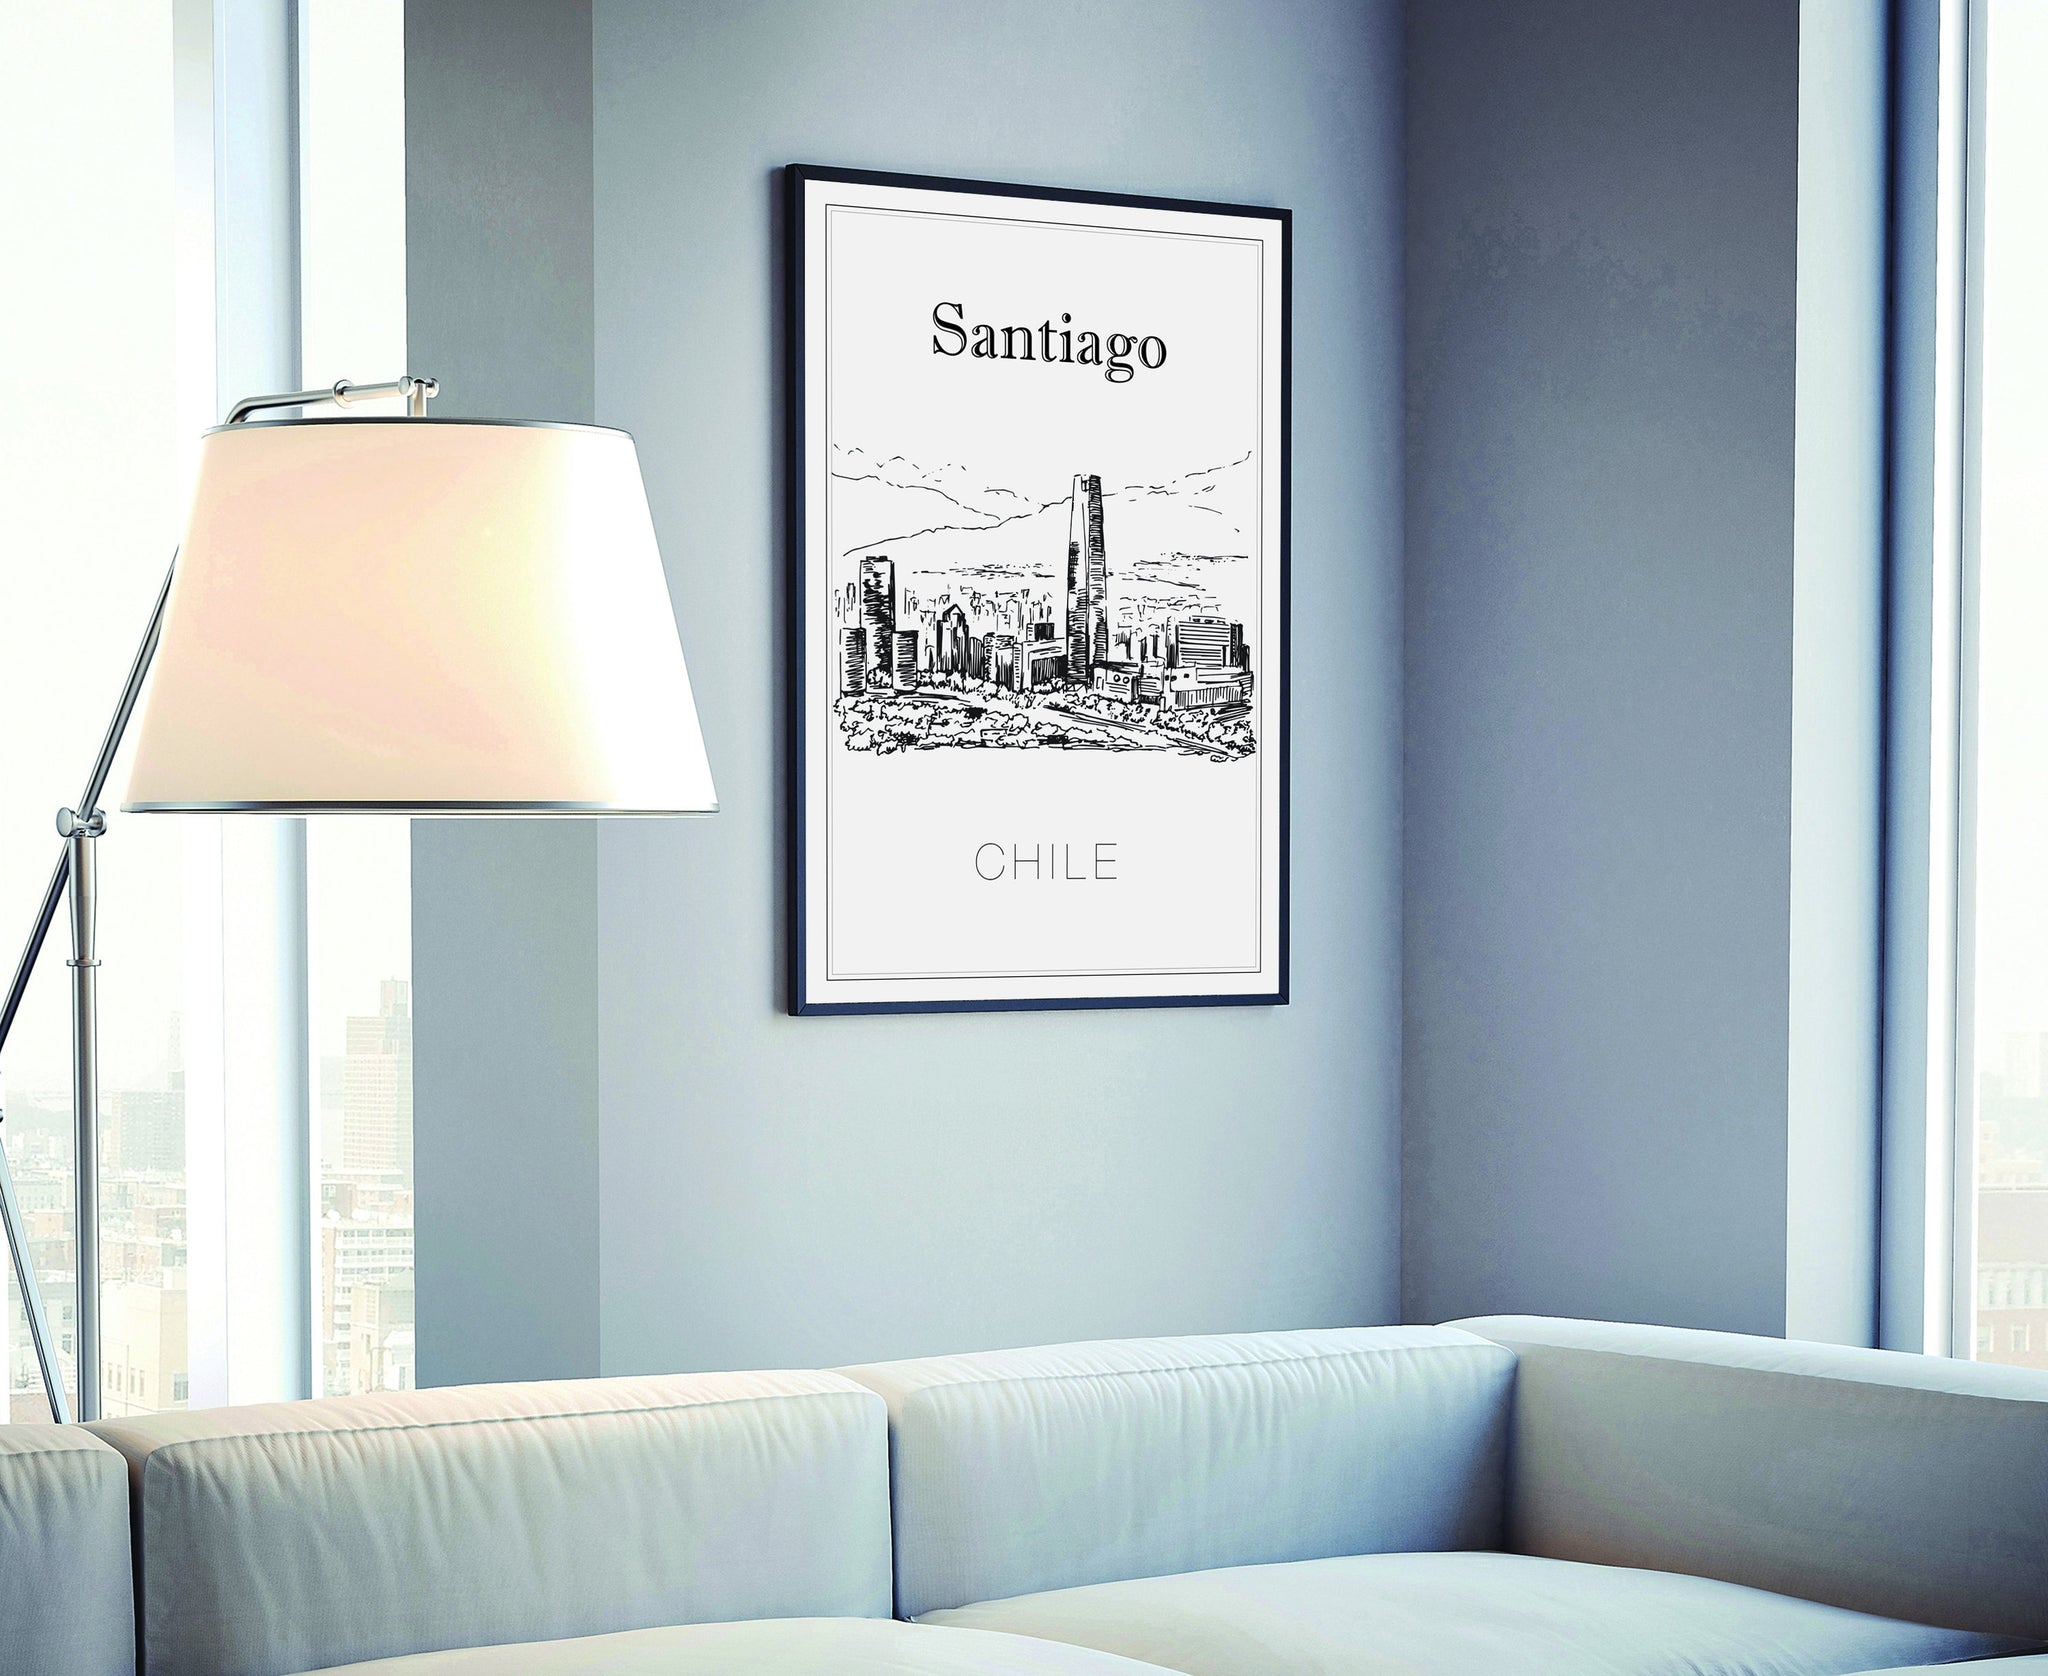 Hand Drawn Poster, Santiago Travel Poster, Chile Poster Wall Art, Santiago Cityscape and Landmark Map, City Map Poster for Home Office